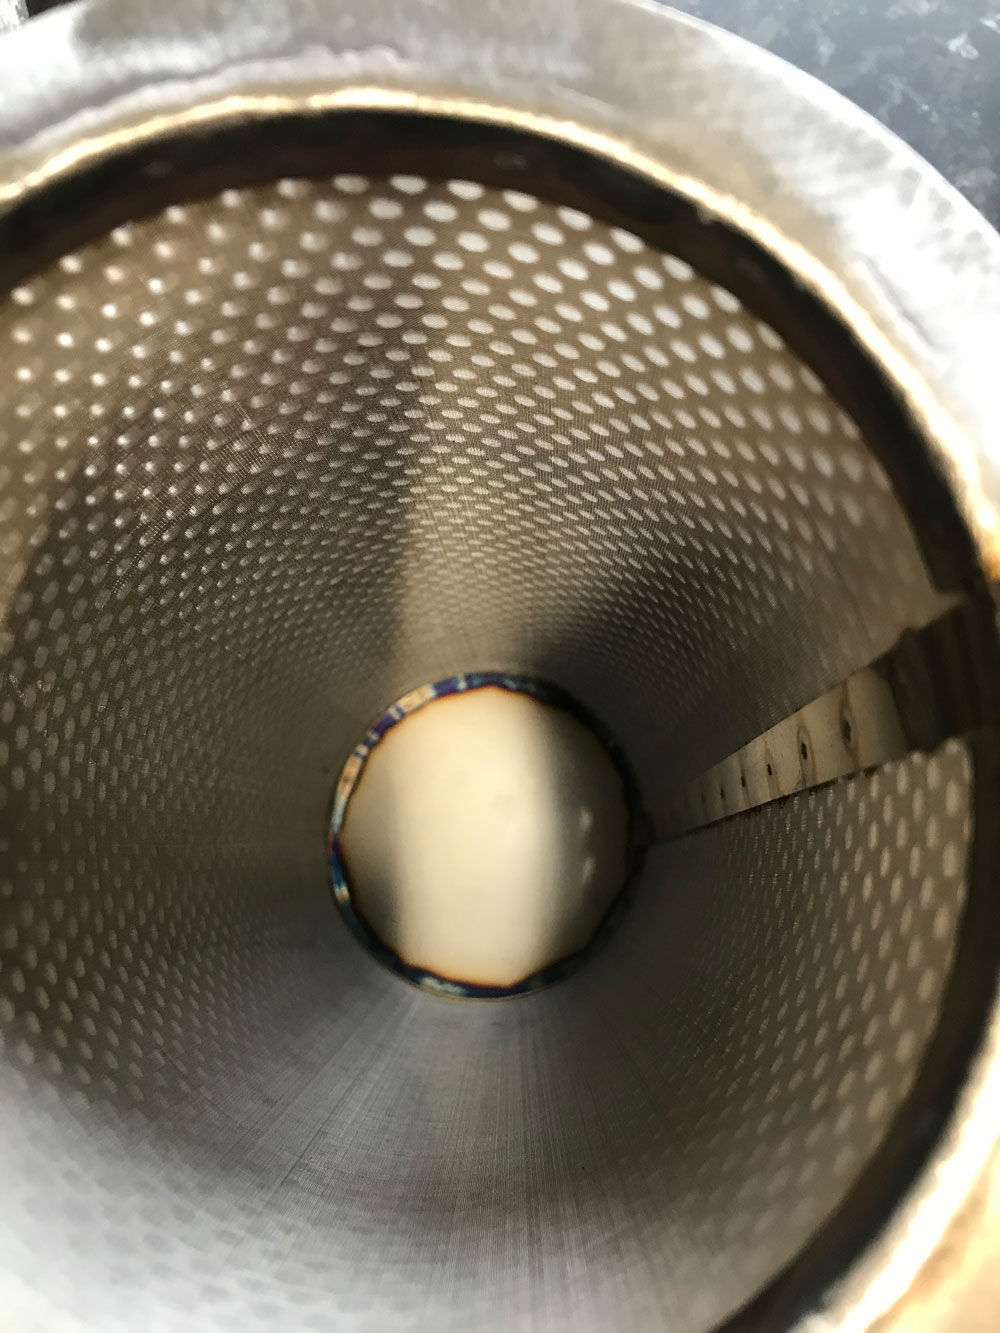 Strainer after Ultrasonic Cleaning process